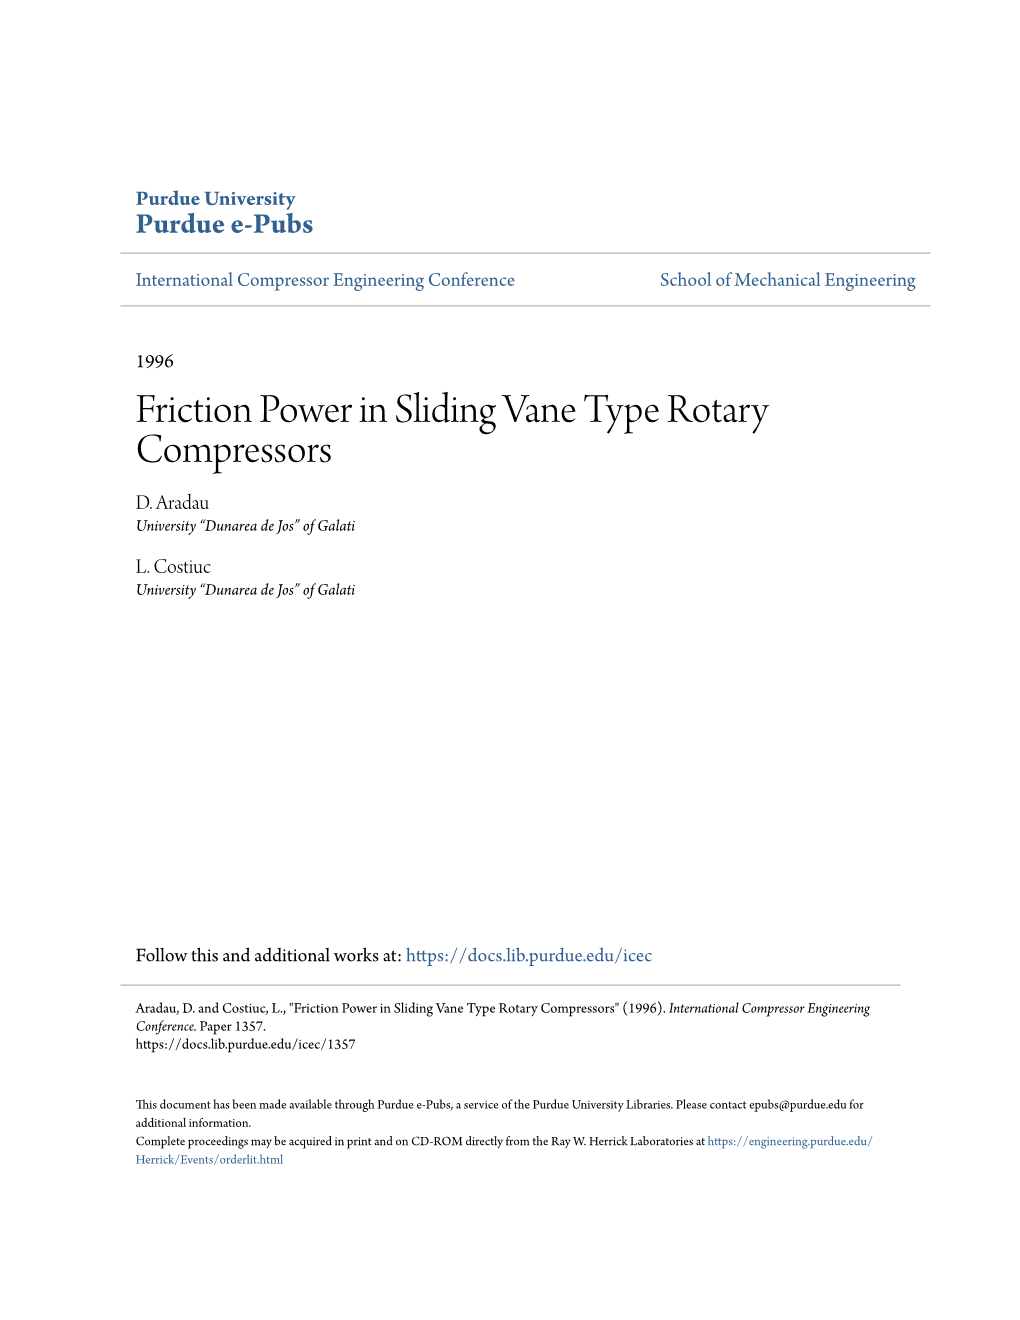 Friction Power in Sliding Vane Type Rotary Compressors D